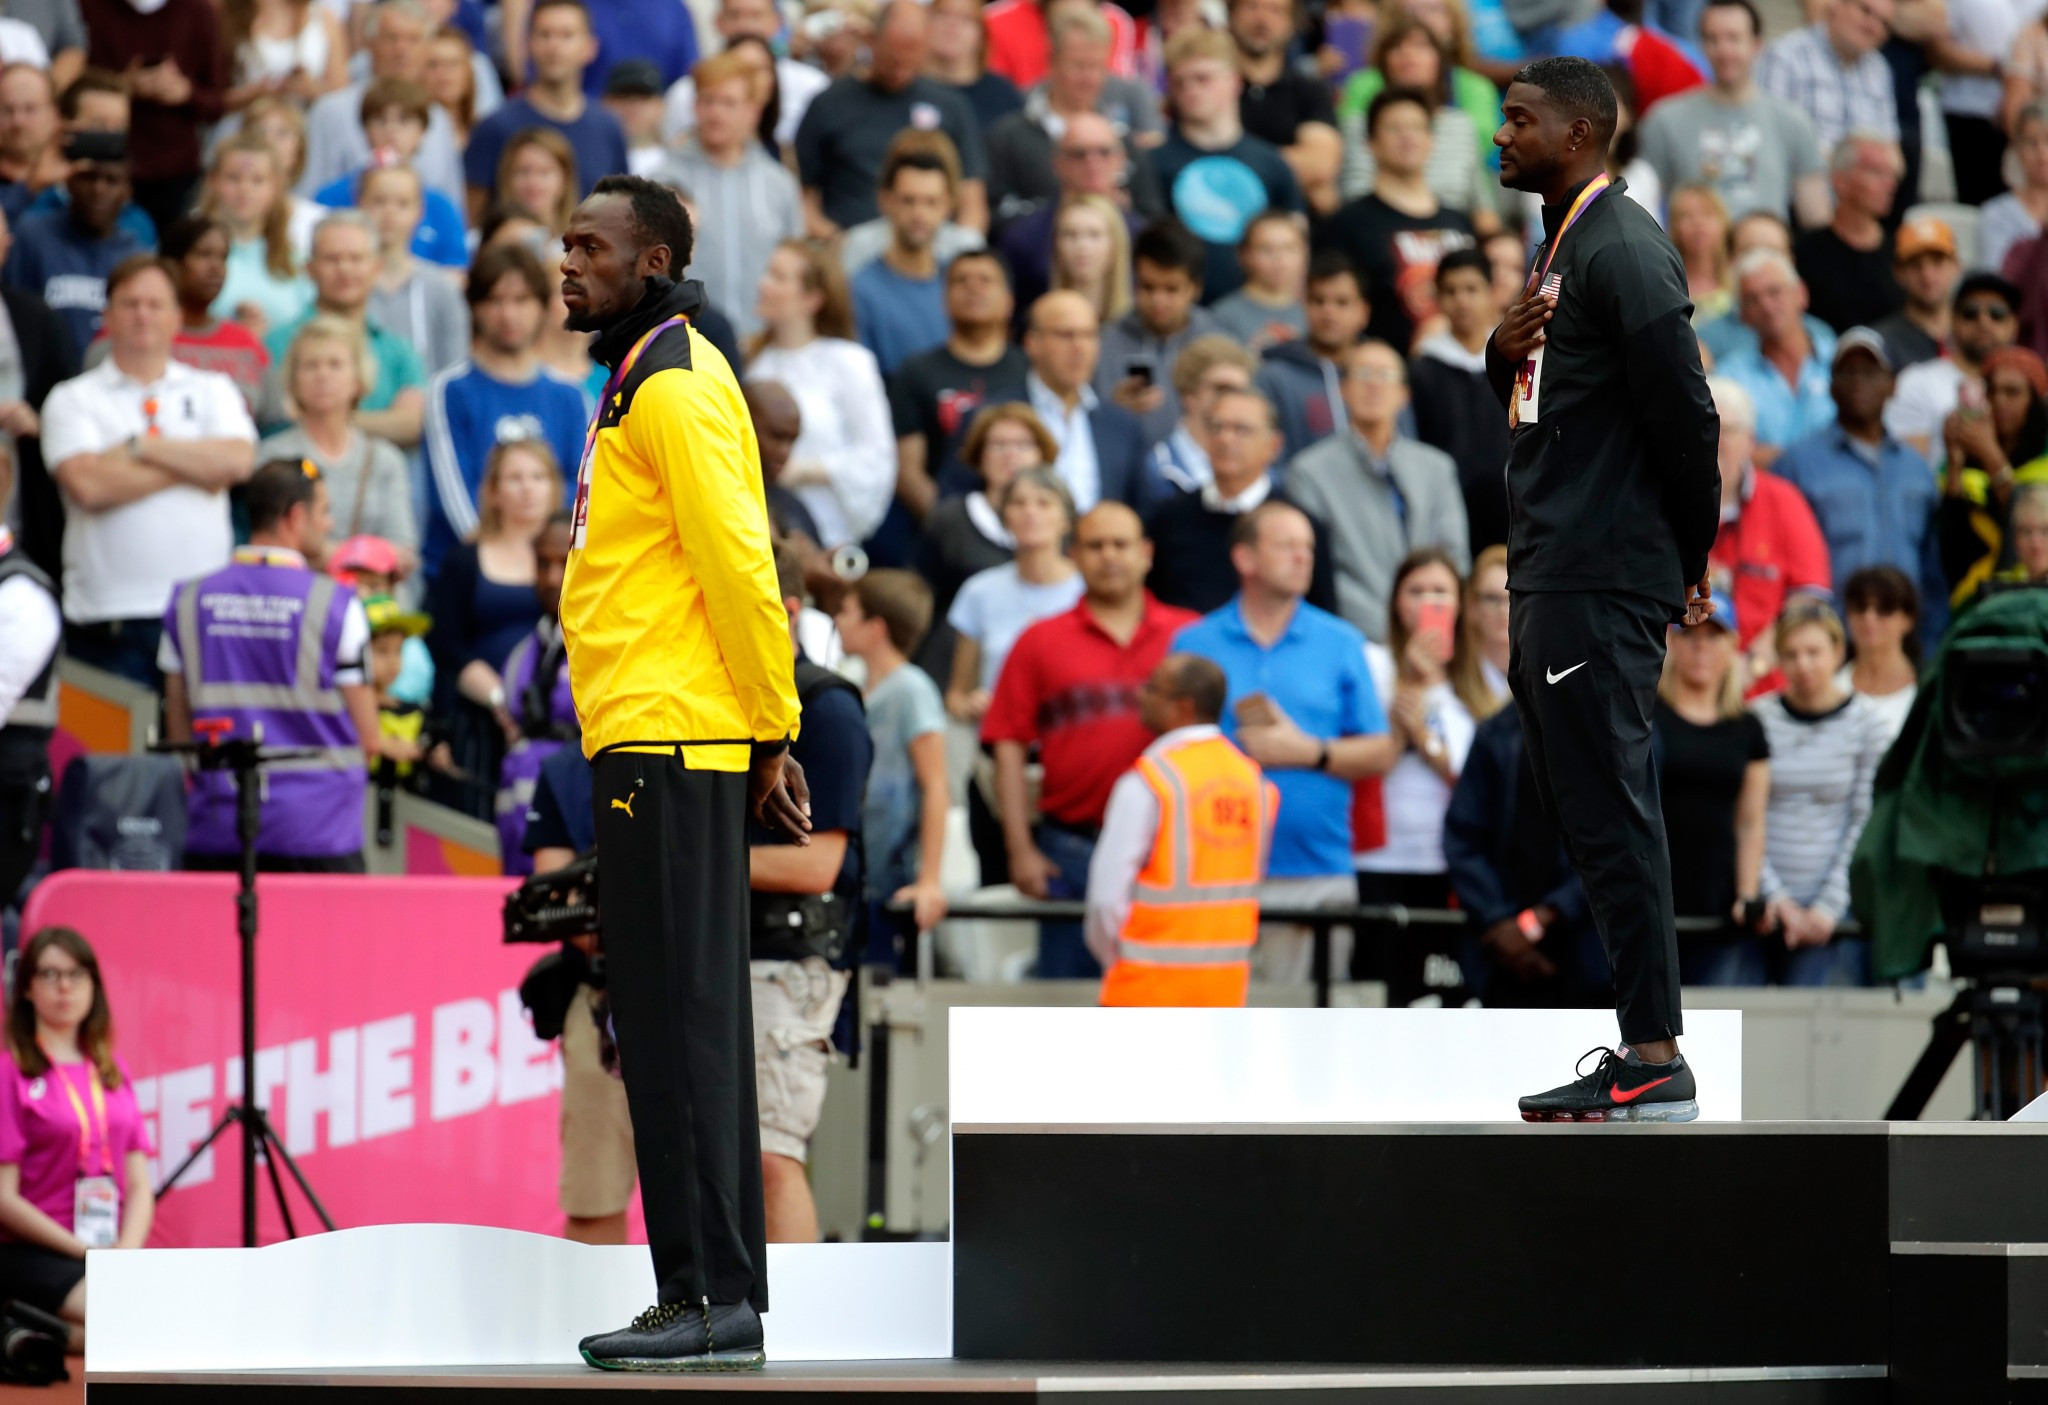 Justin Gatlin, centre, was booed when he was presented with his gold medal for victory in the 100 metres at the IAAF World Championships, with Usain Bolt, right, getting the bronze ©Getty Images